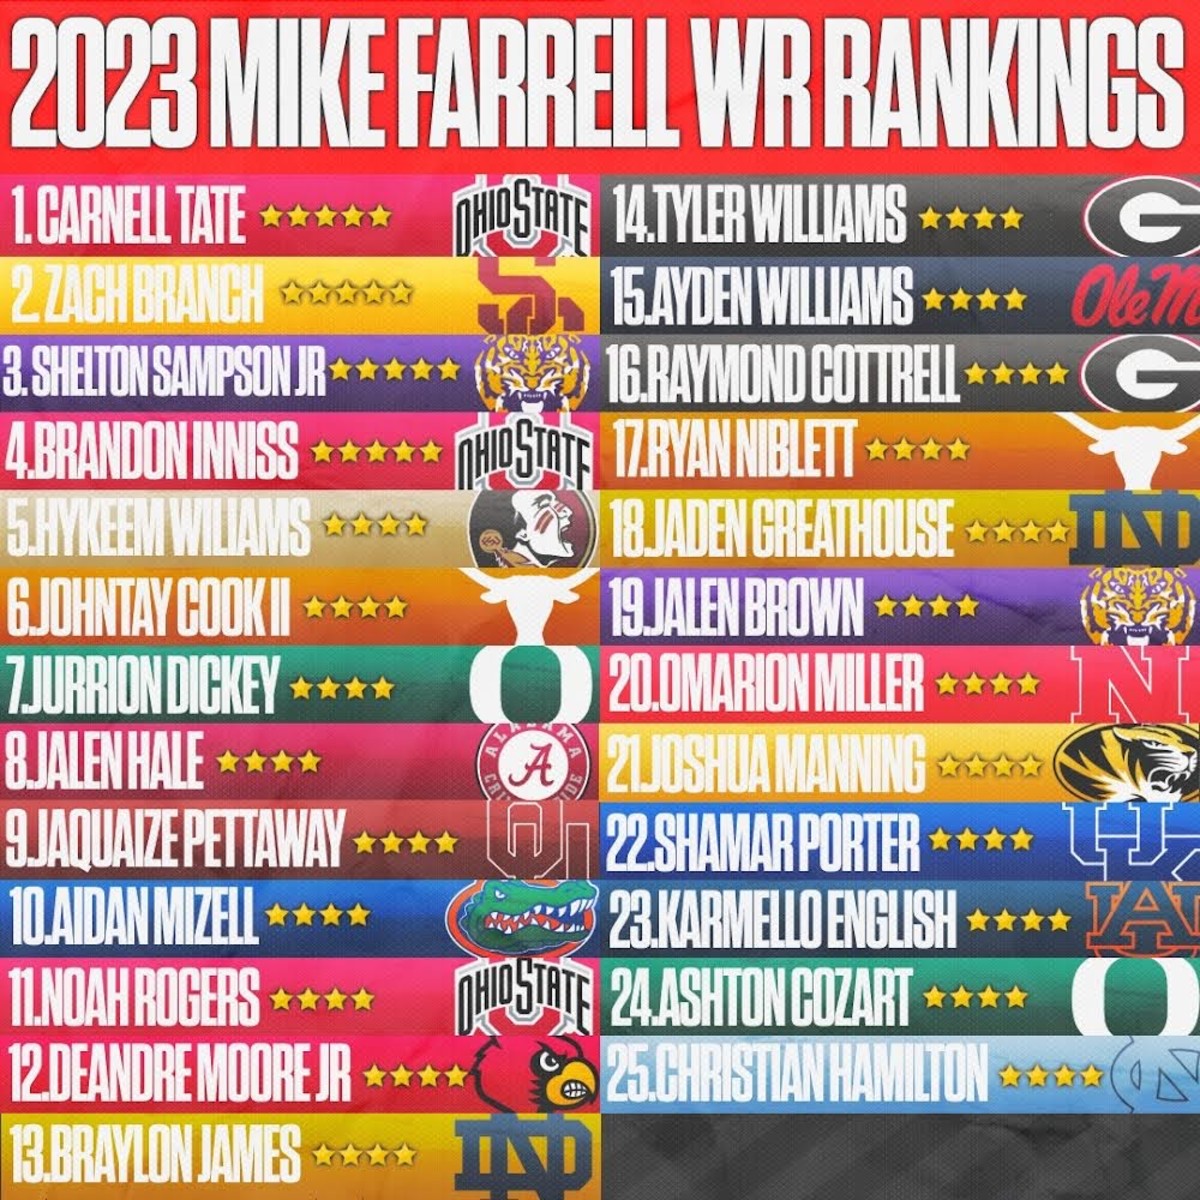 Mike Farrell's Top 25 WRs for the class of 2023